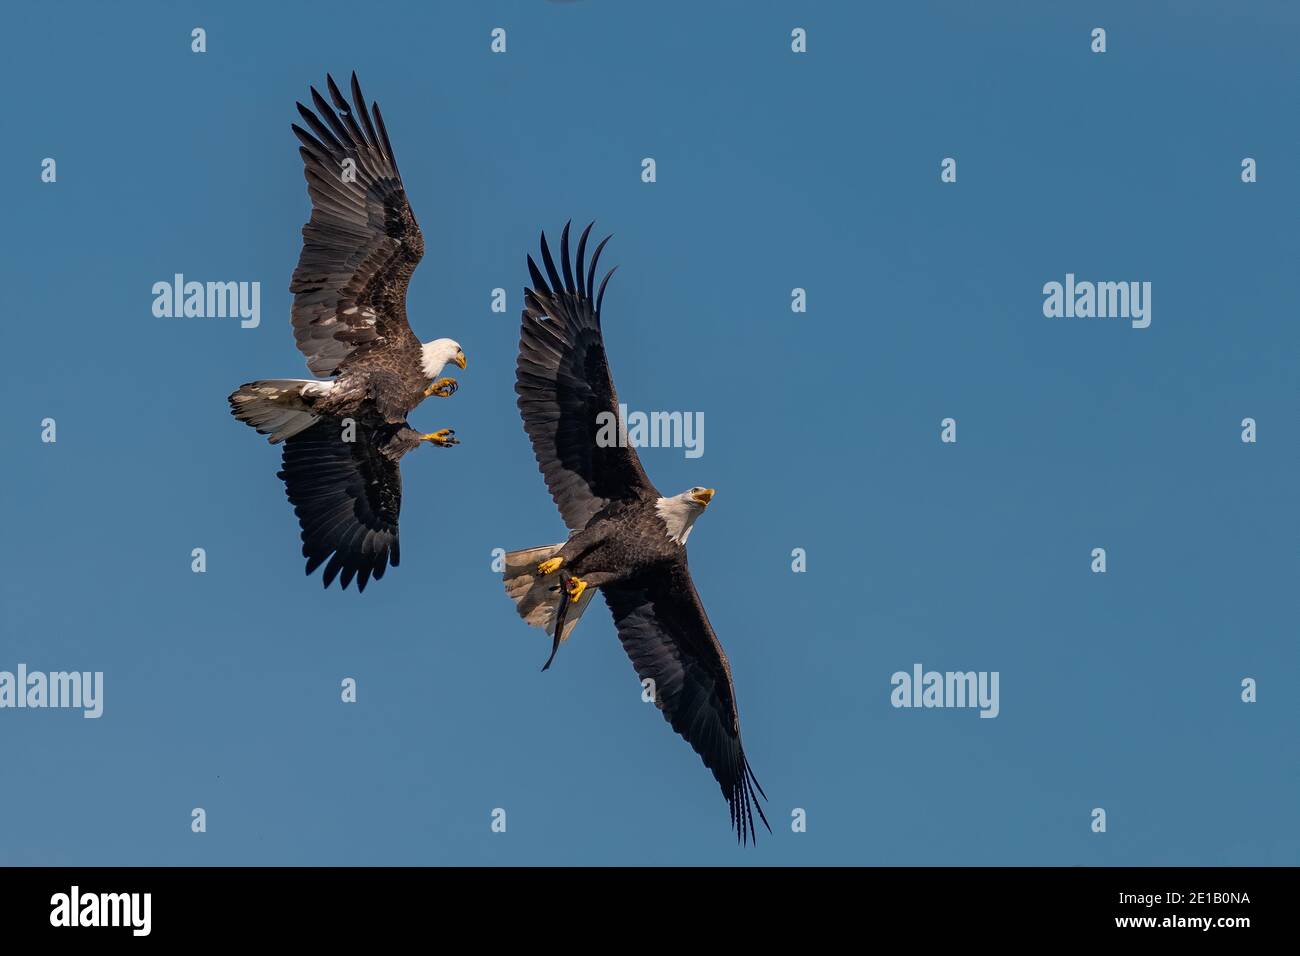 Two bald eagles fighting for a fish in the mid air, Conowingo, MD, USA Stock Photo